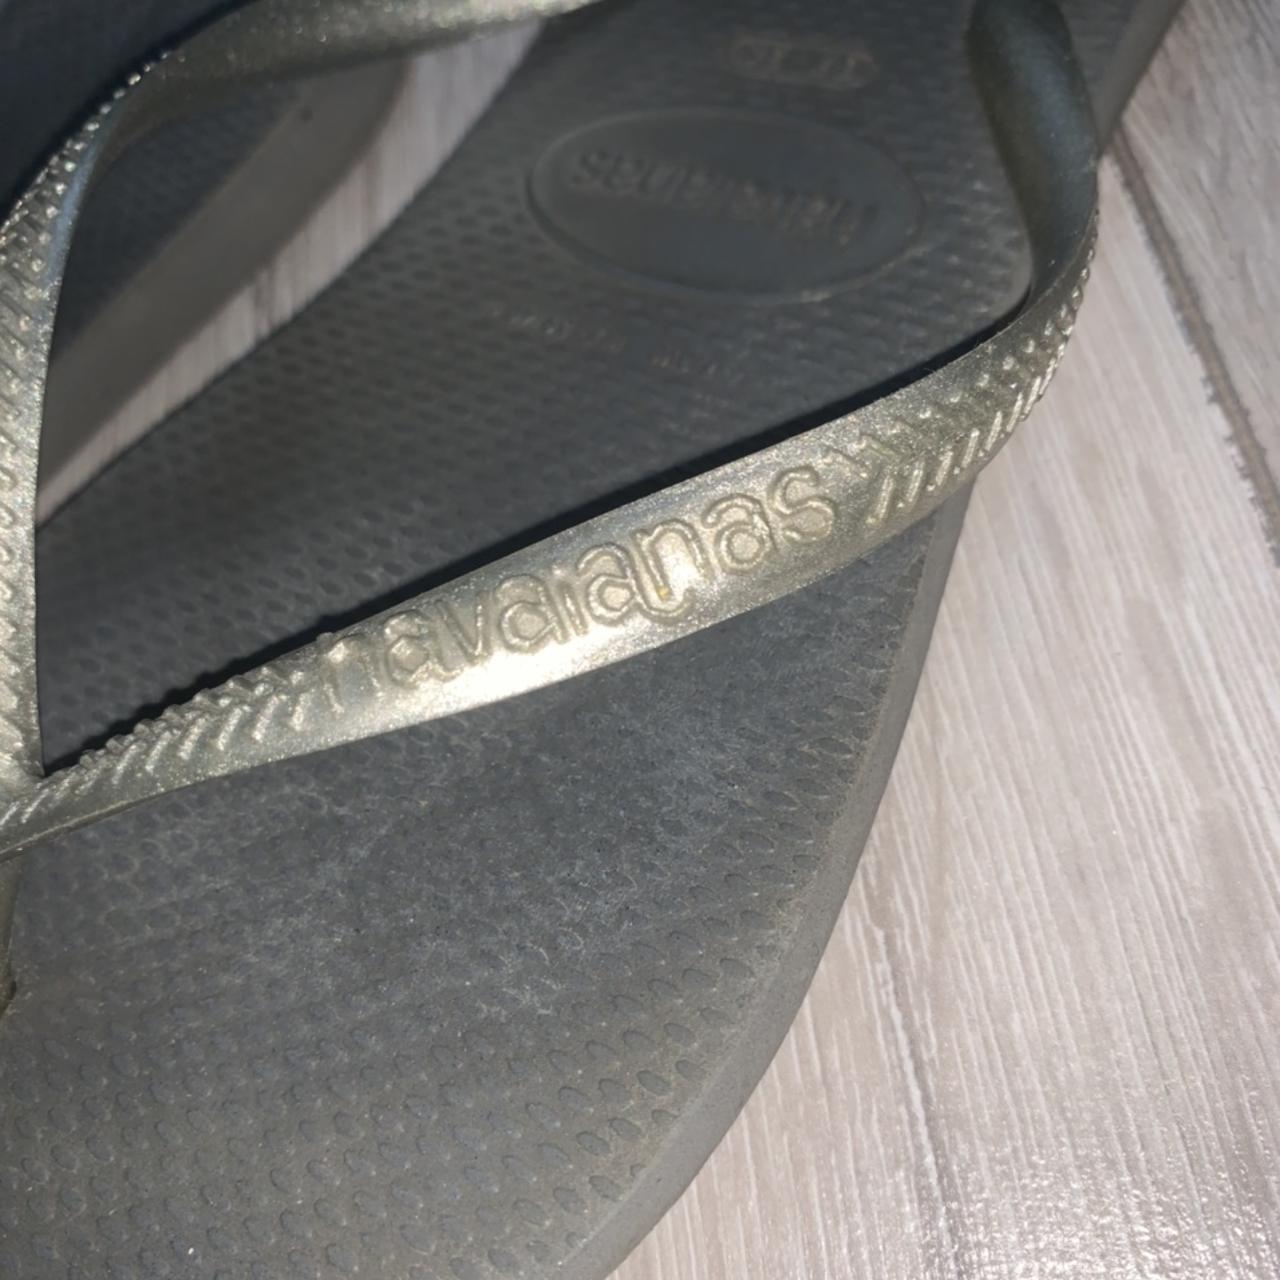 Havaianas Women's Silver and Grey Sandals (3)